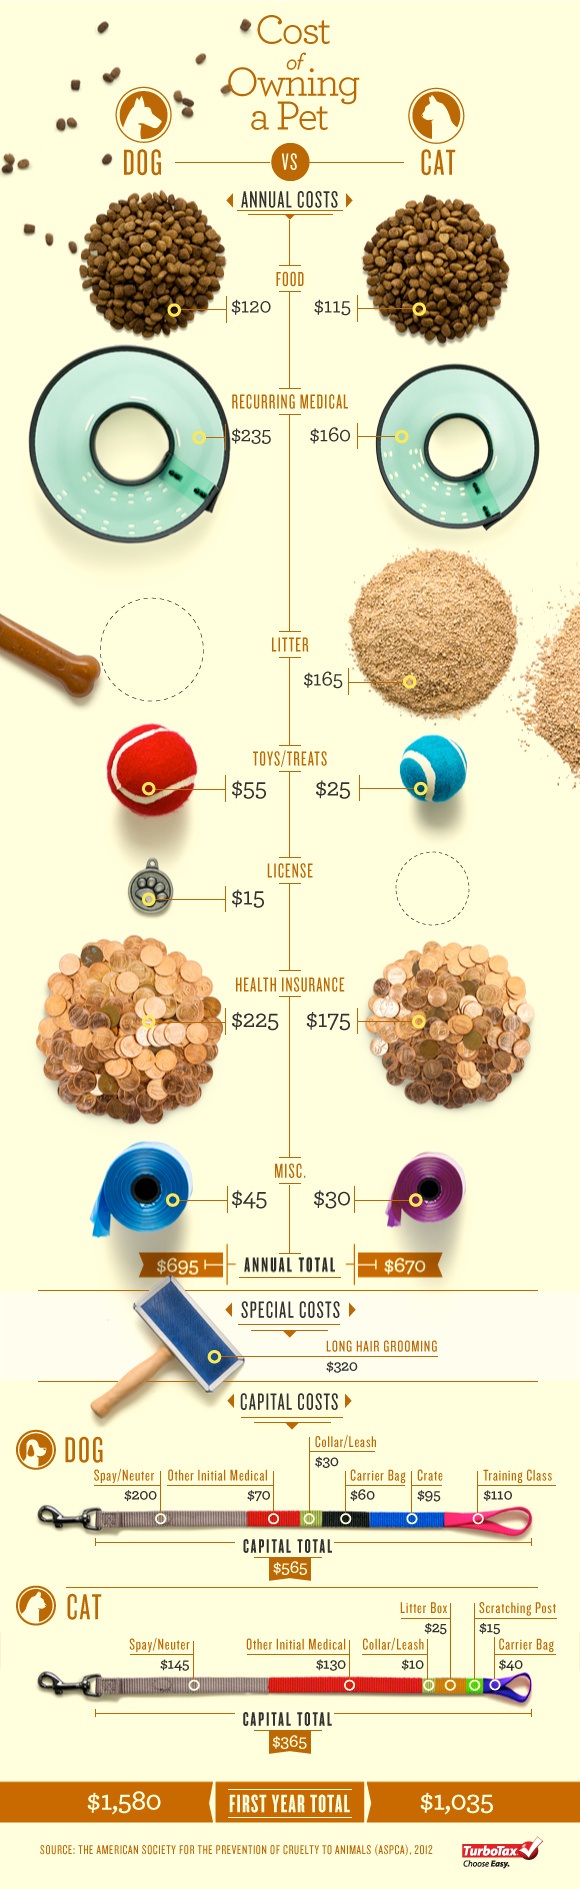 The Cost of Owning a Pet - Infographic